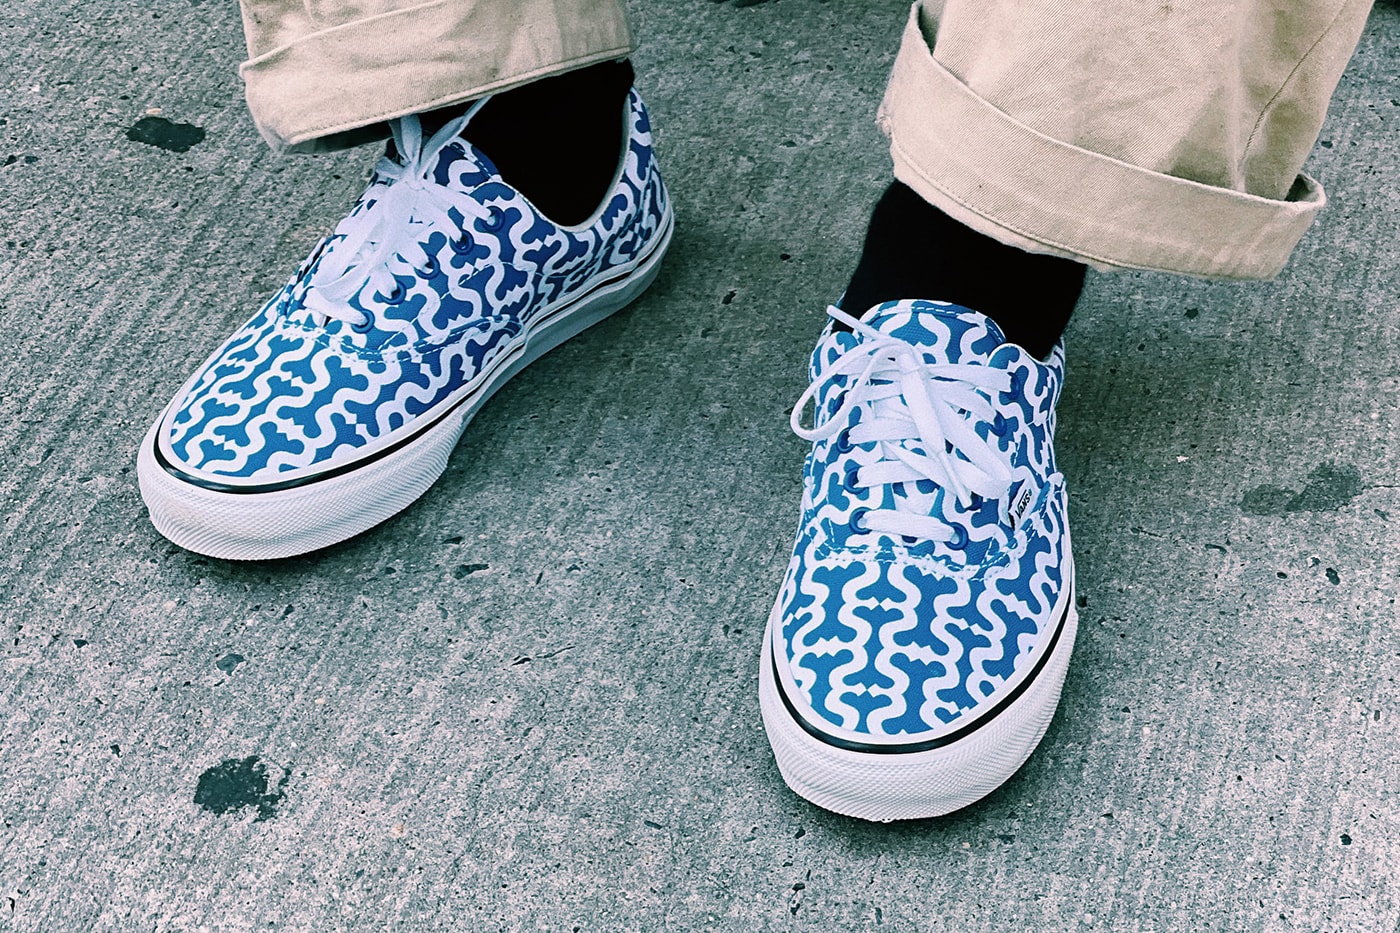 Supreme and Vans Announce Spring Collaboration